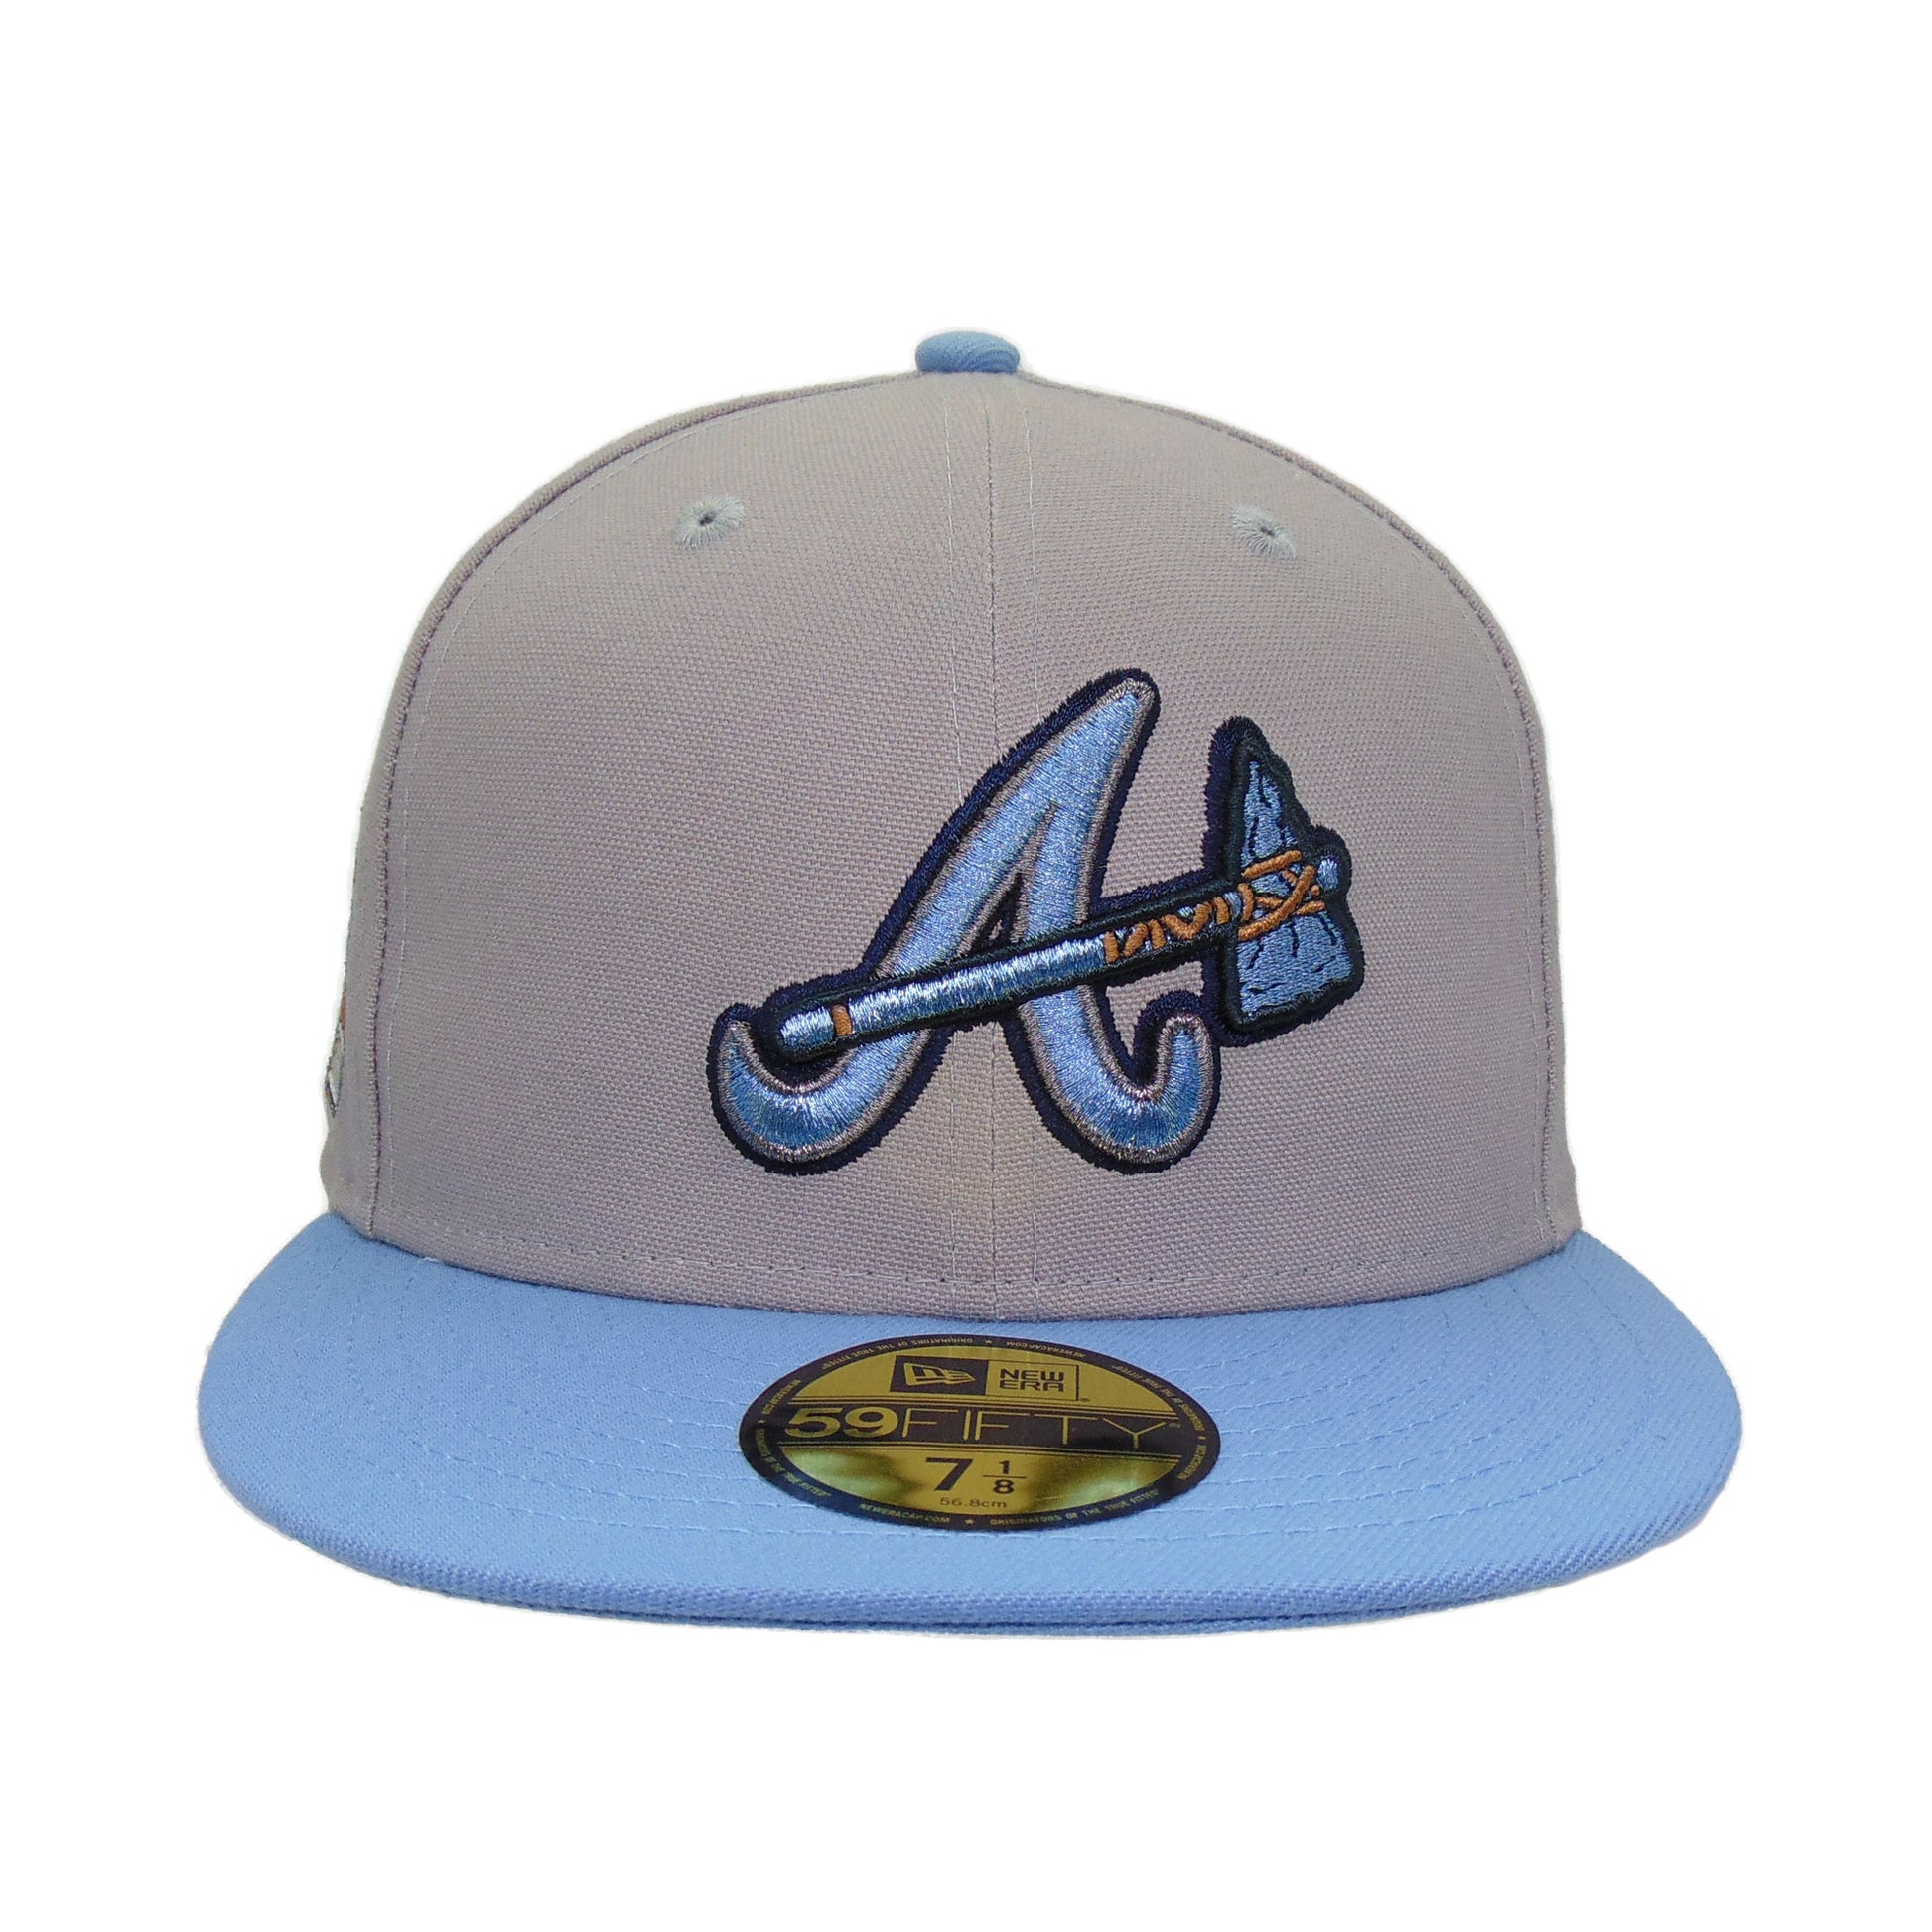 JustFitteds Exclusive Las Vegas Raiders Navy Sky Blue 59Fifty